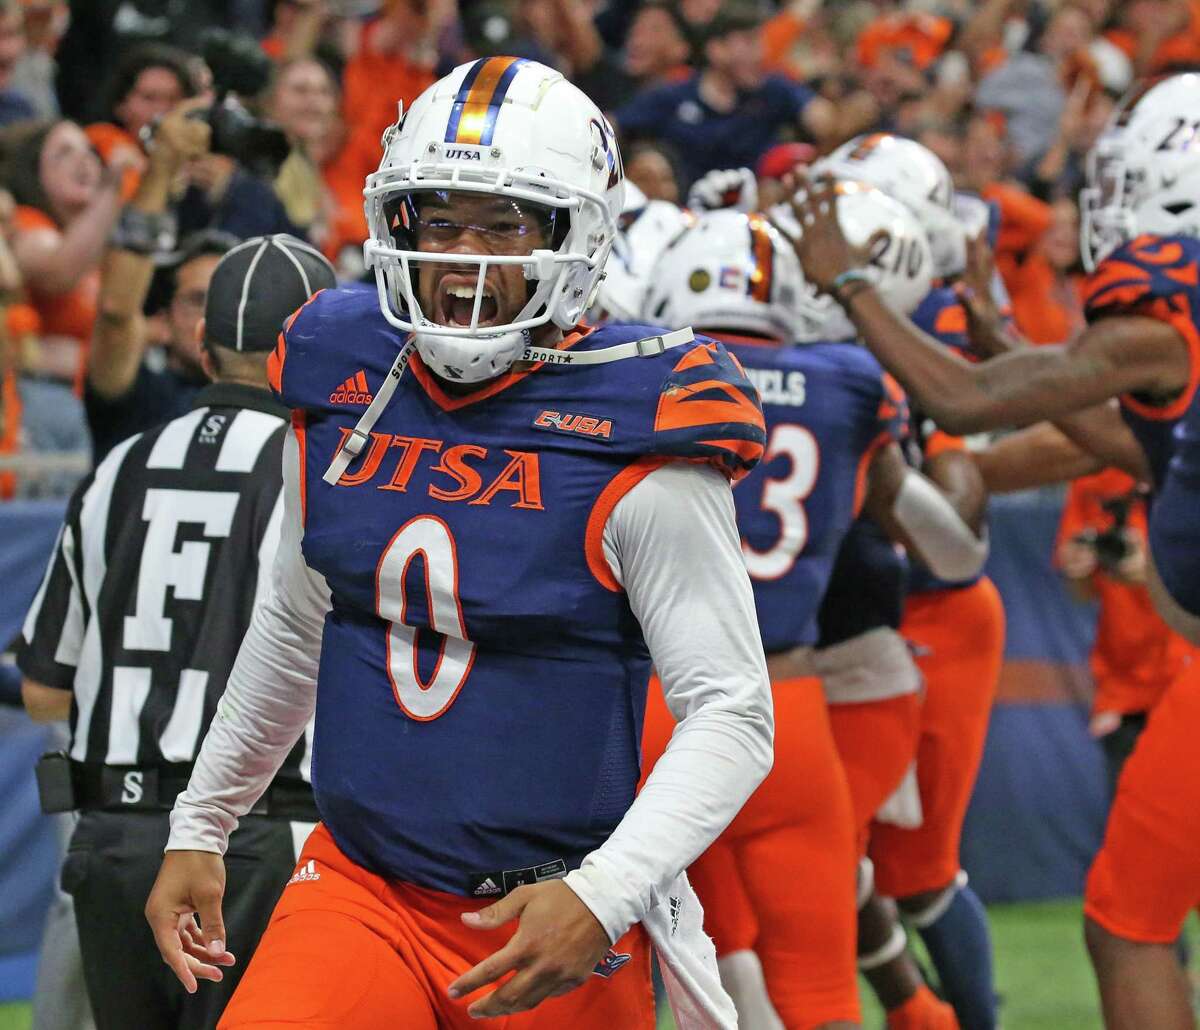 UTSA quarterback Frank Harris celebrates as the Oscar Cardenas’s game-winning touchdown catch late in the game against UAB on Saturday Nov. 20, 2021, at the Alamodome.